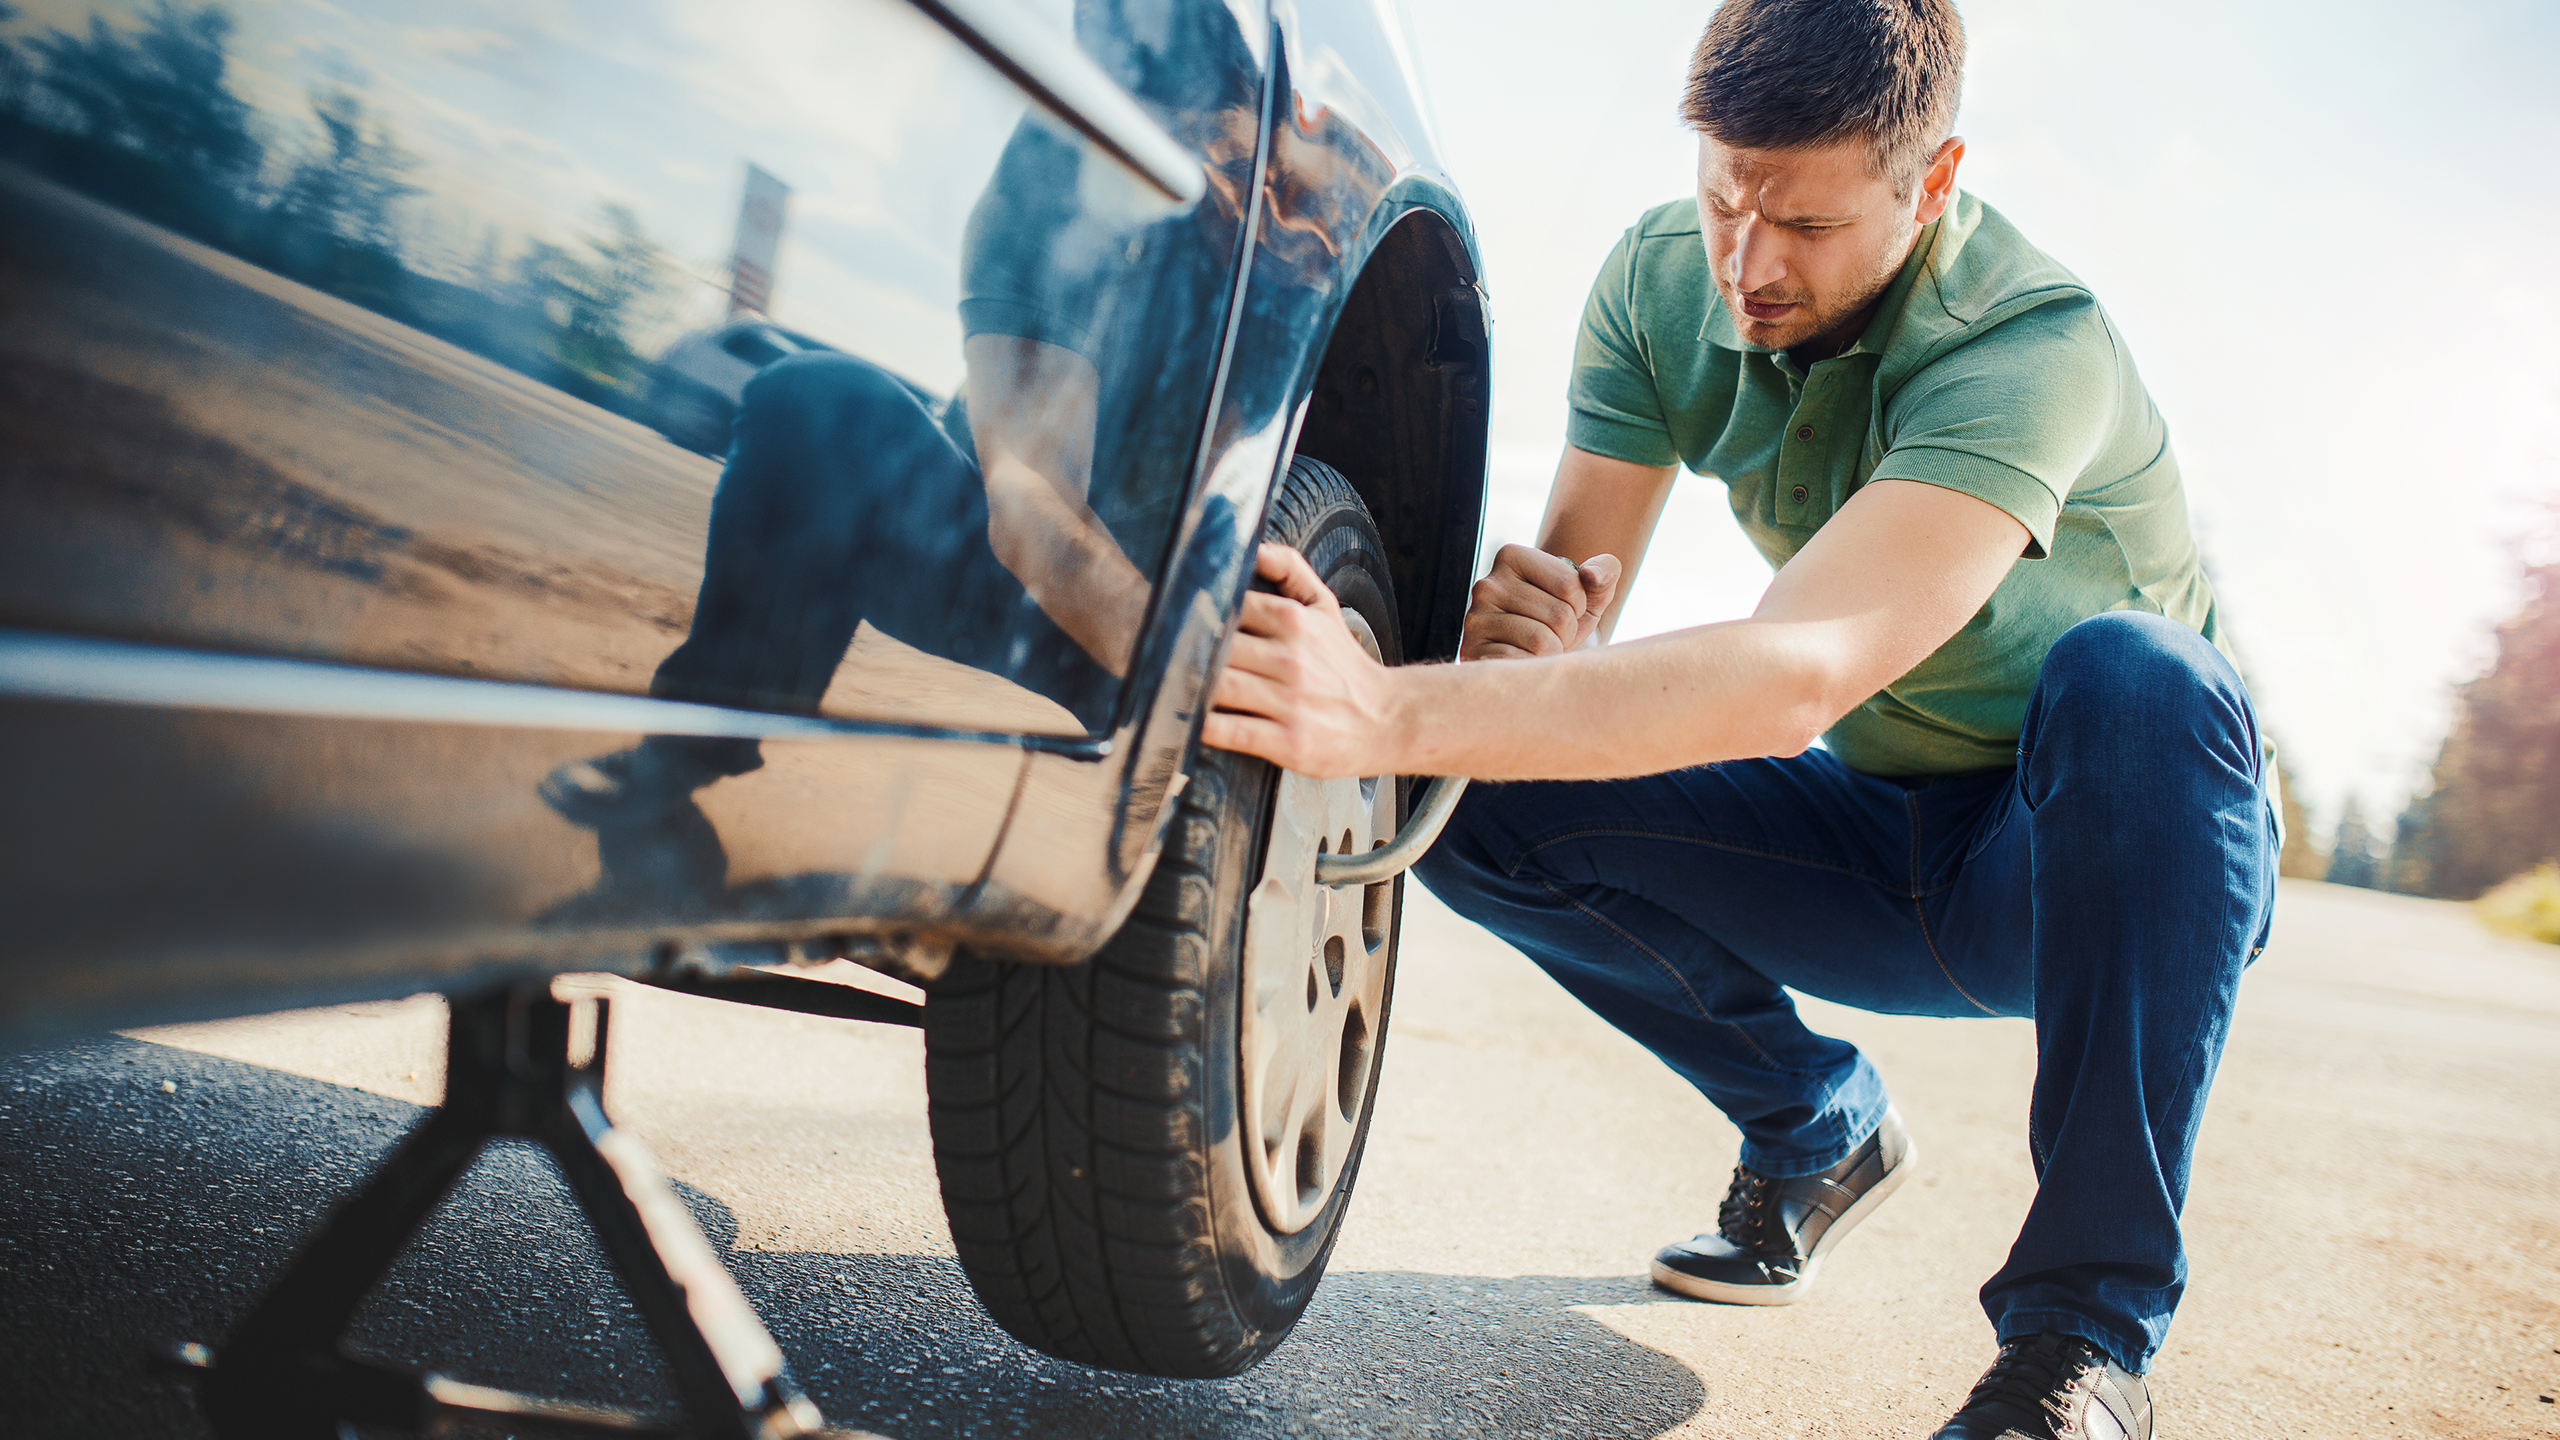 Flat Tires: What You Need to Know